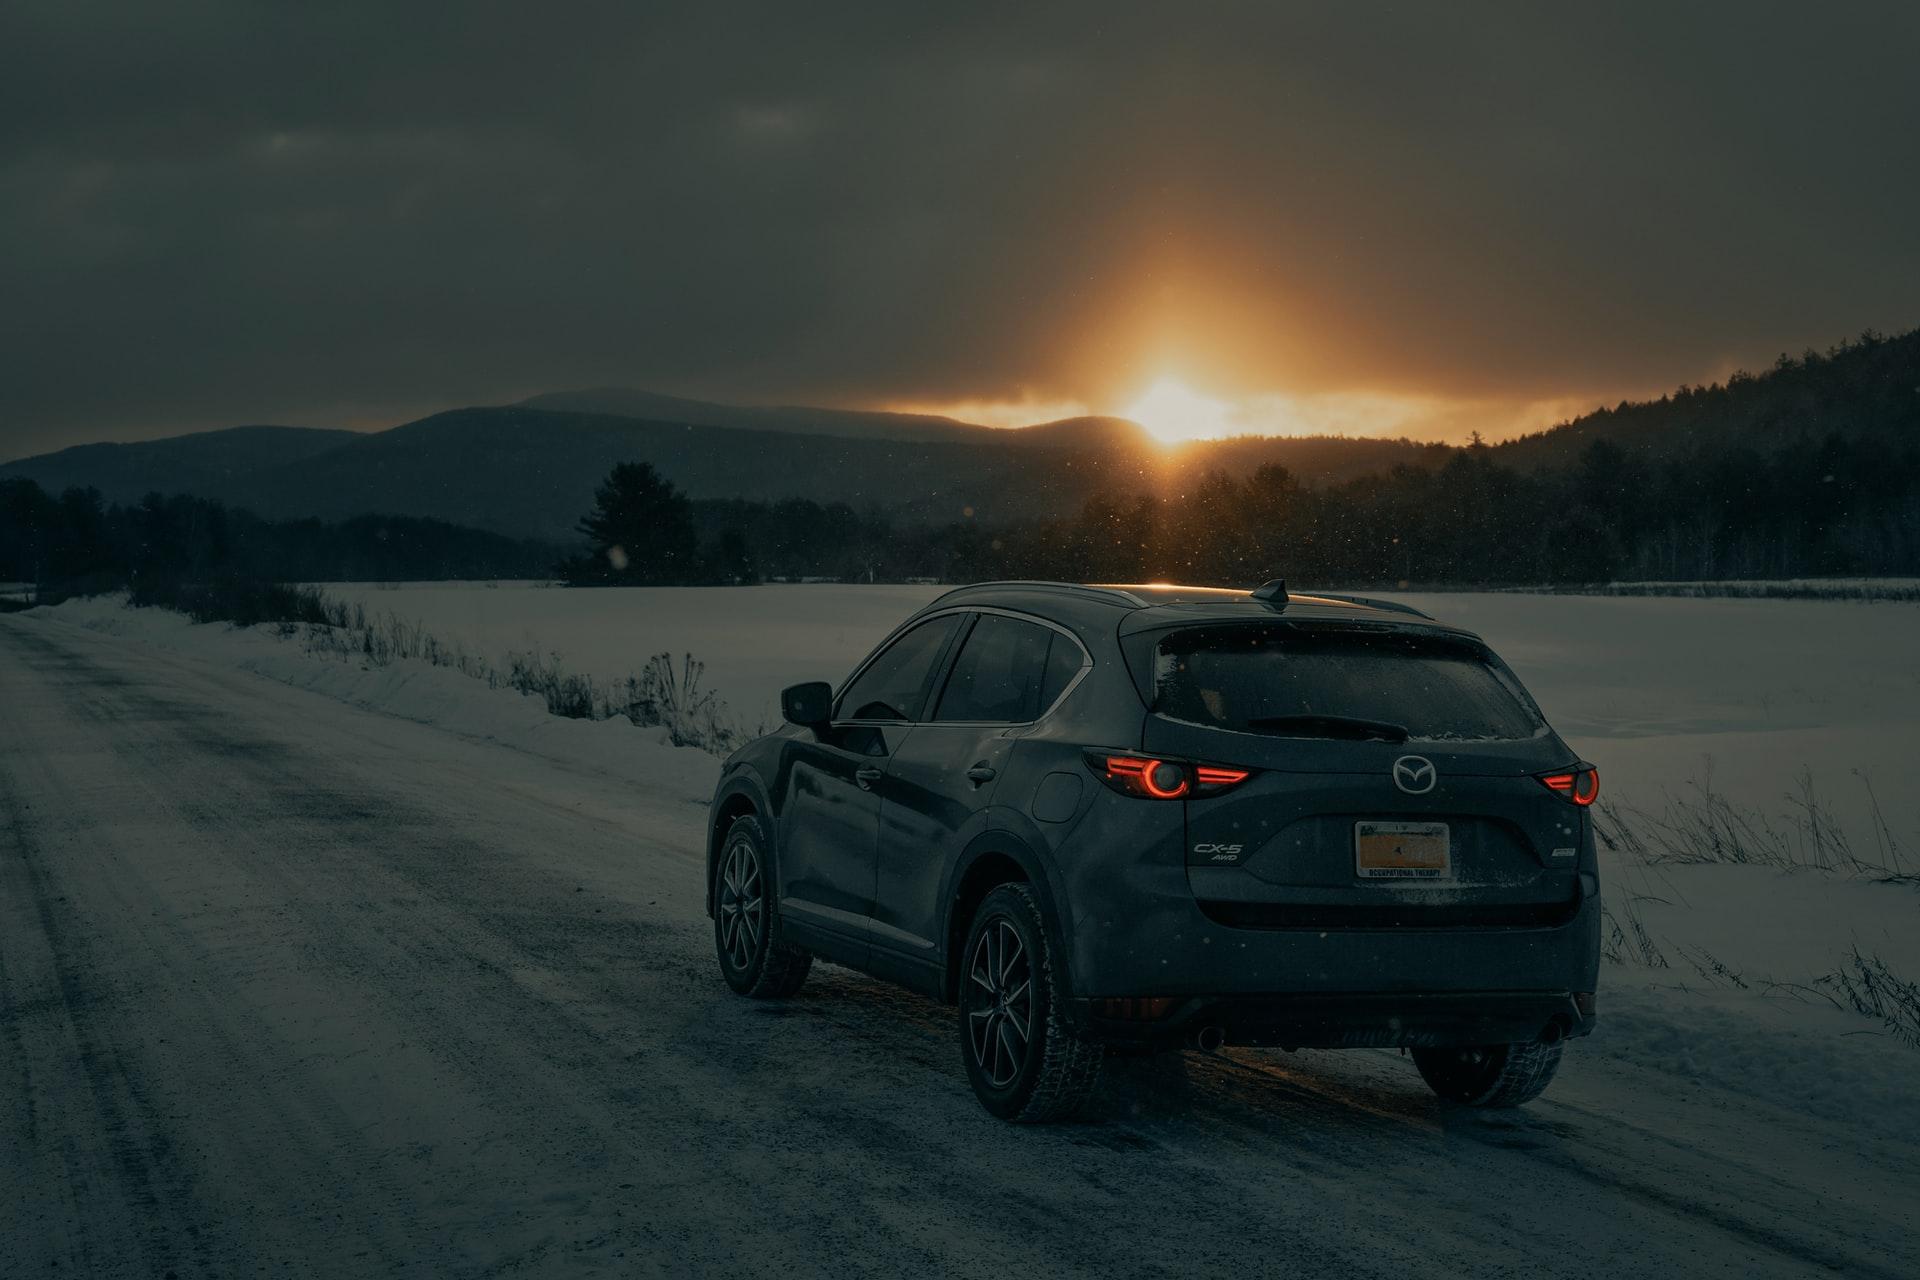 The Mazda CX-5 offers two Touring trims that will take you anywhere you need to go.